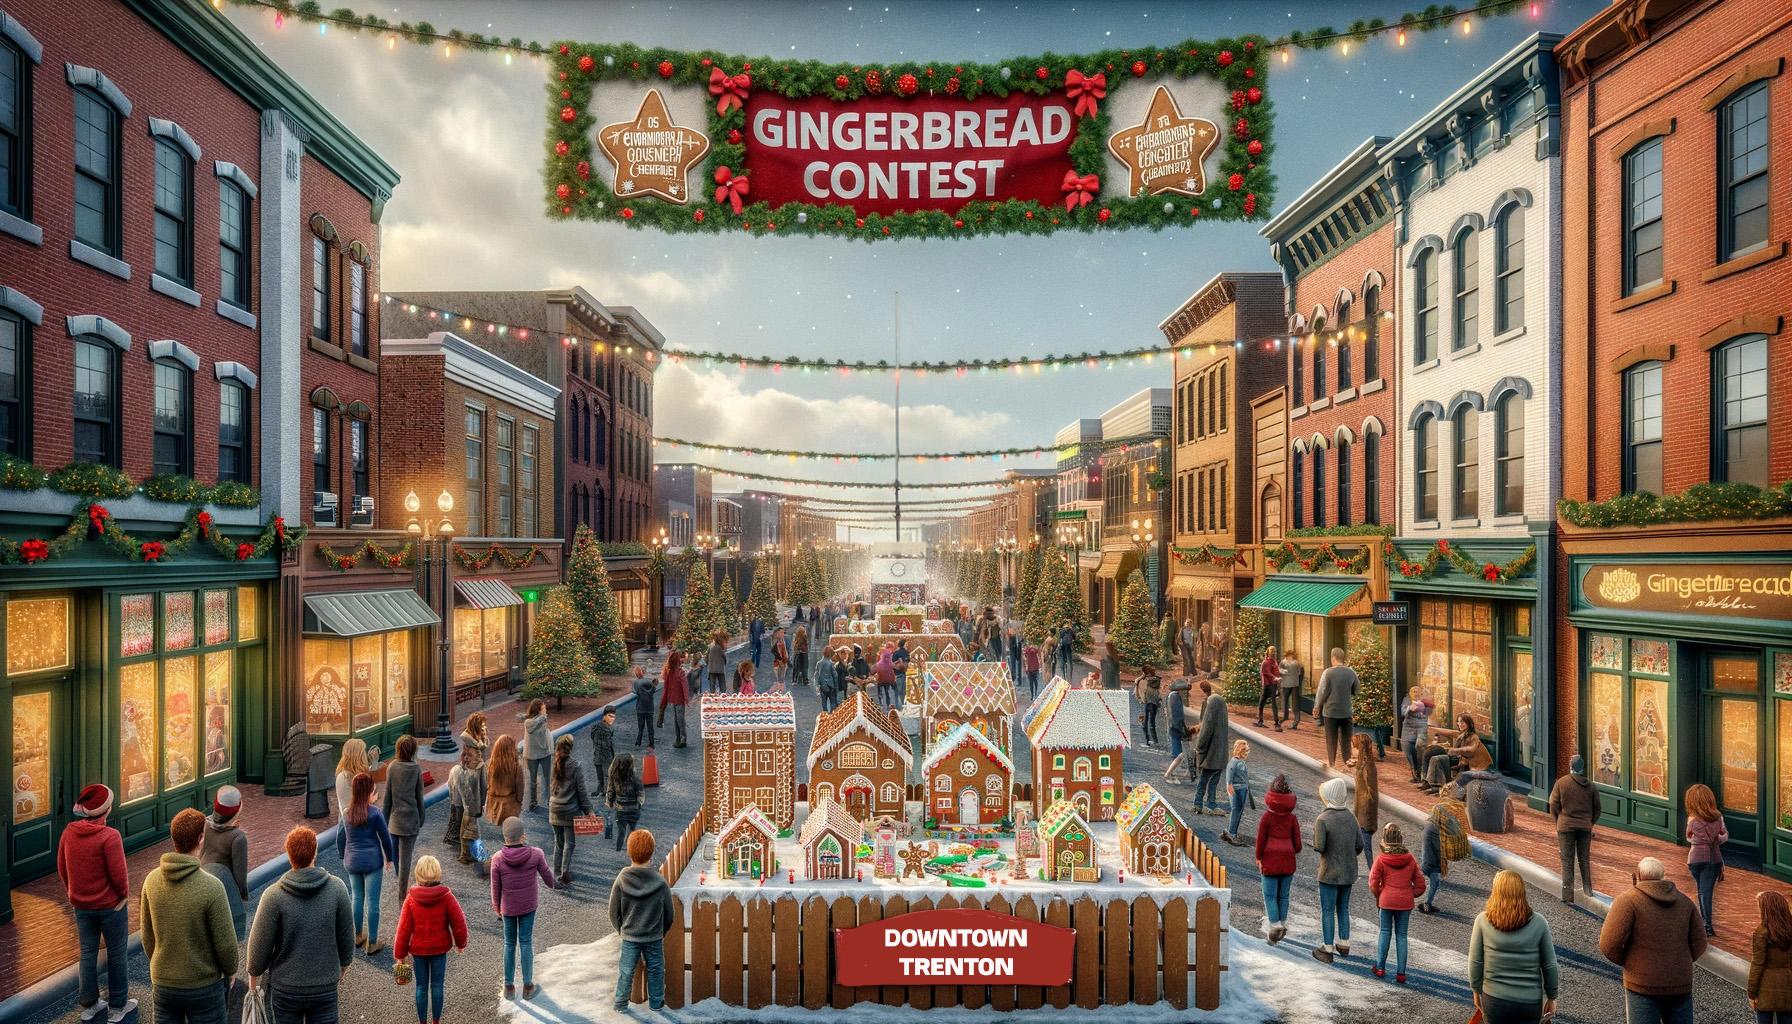 Gingerbread competition or contest news graphic